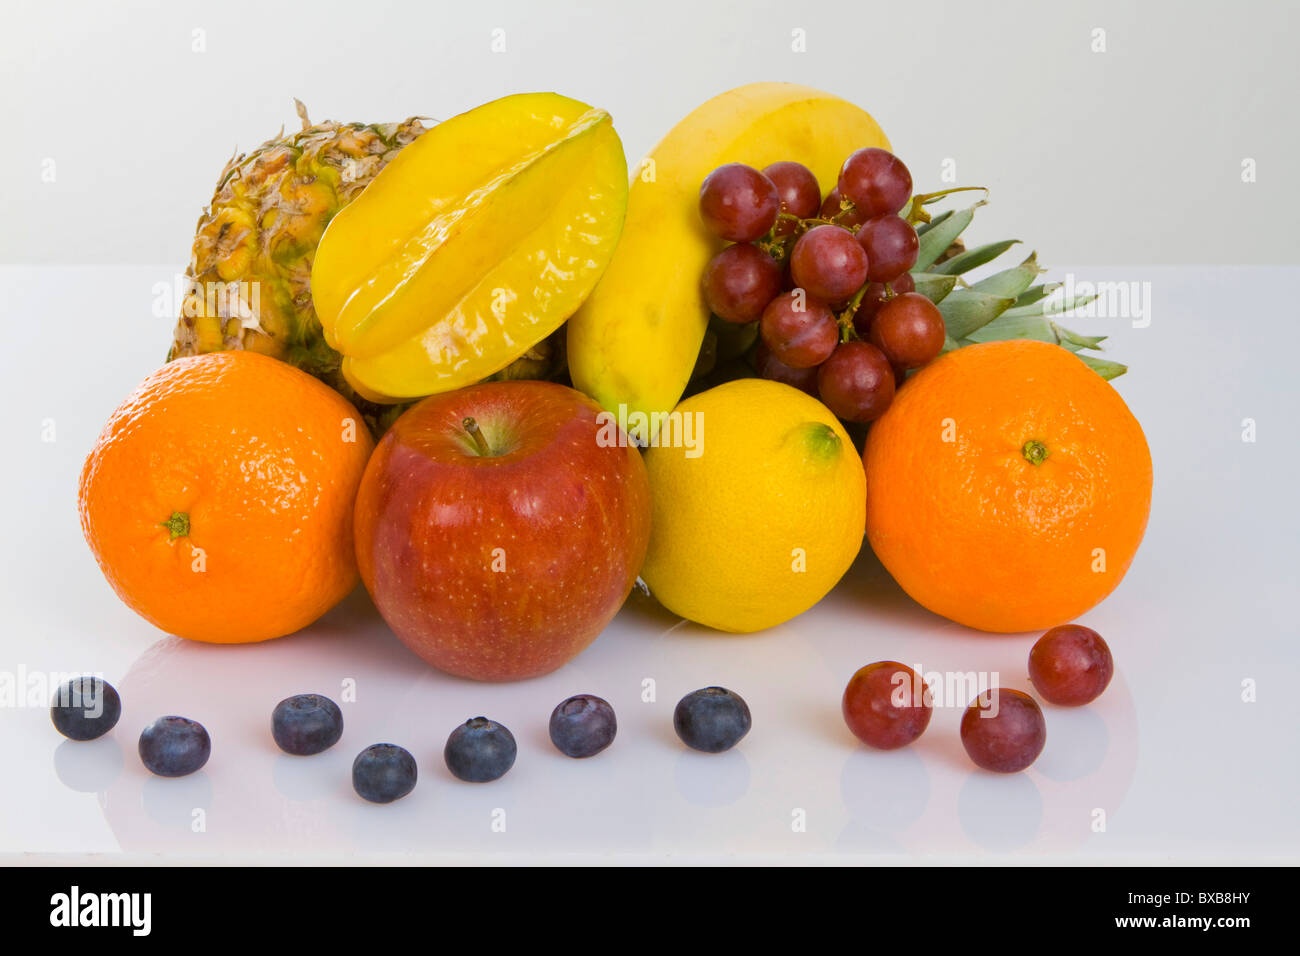 Pineapple, apple, clementines, lemon, star fruit, blueberries and red grapes Stock Photo